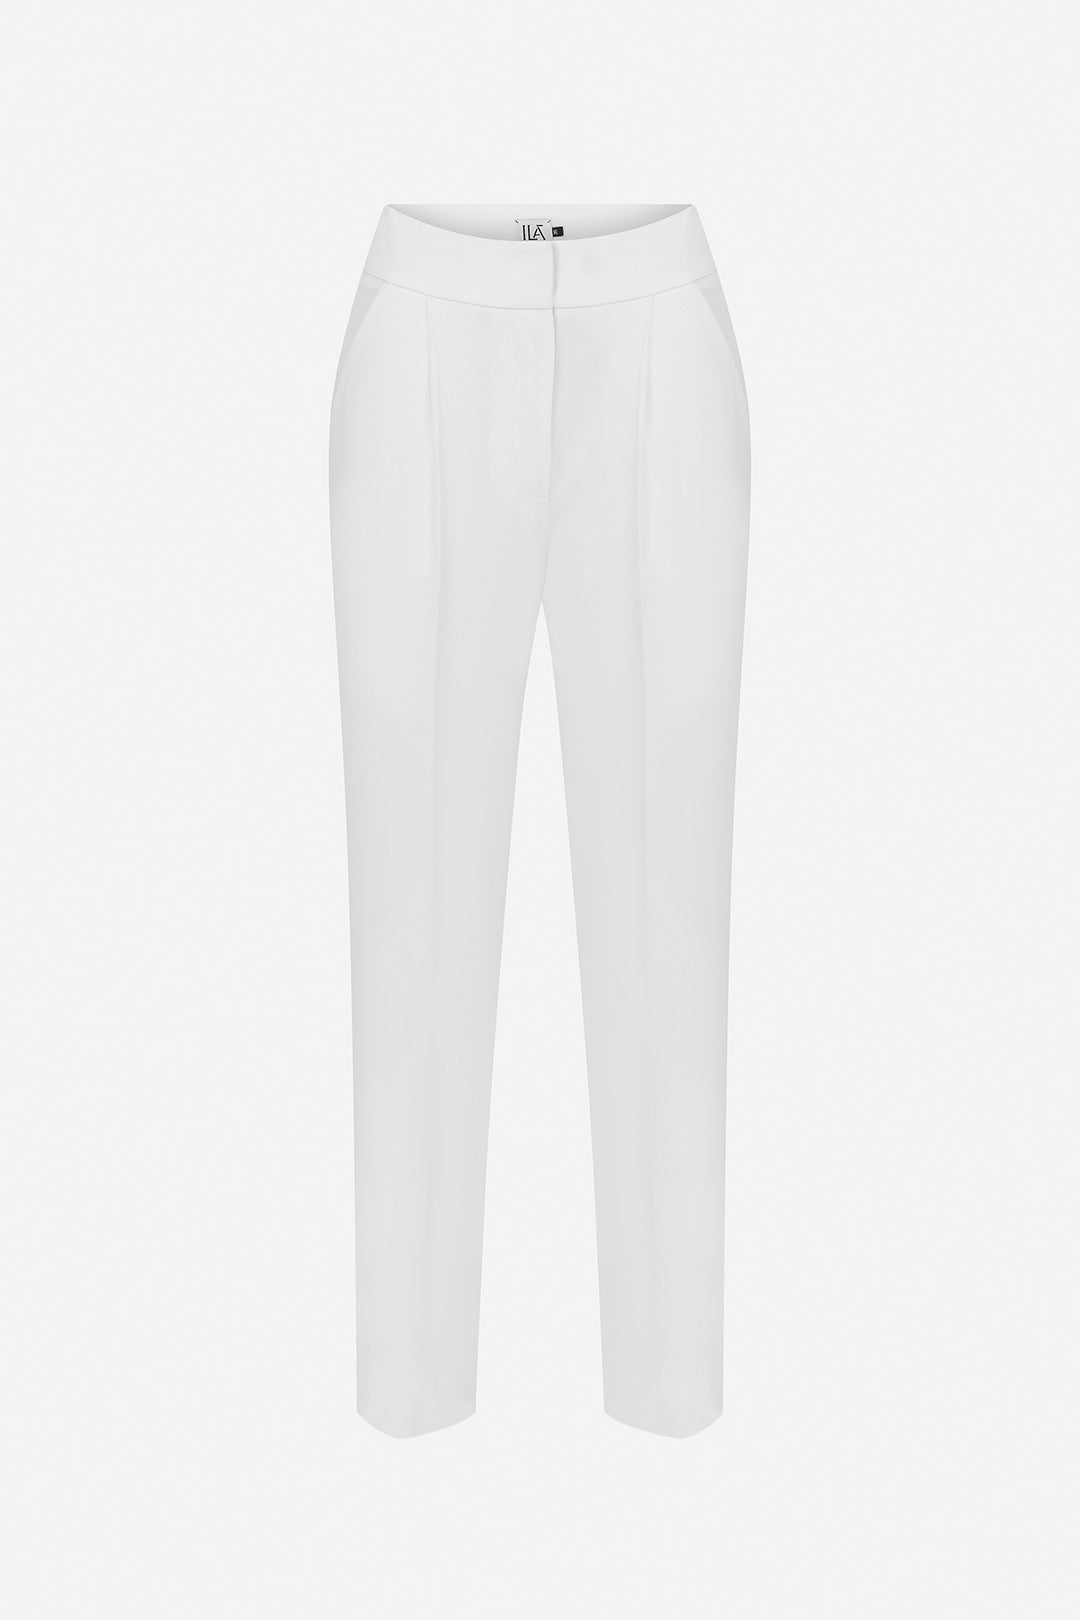 Laia - Pleated trousers in white